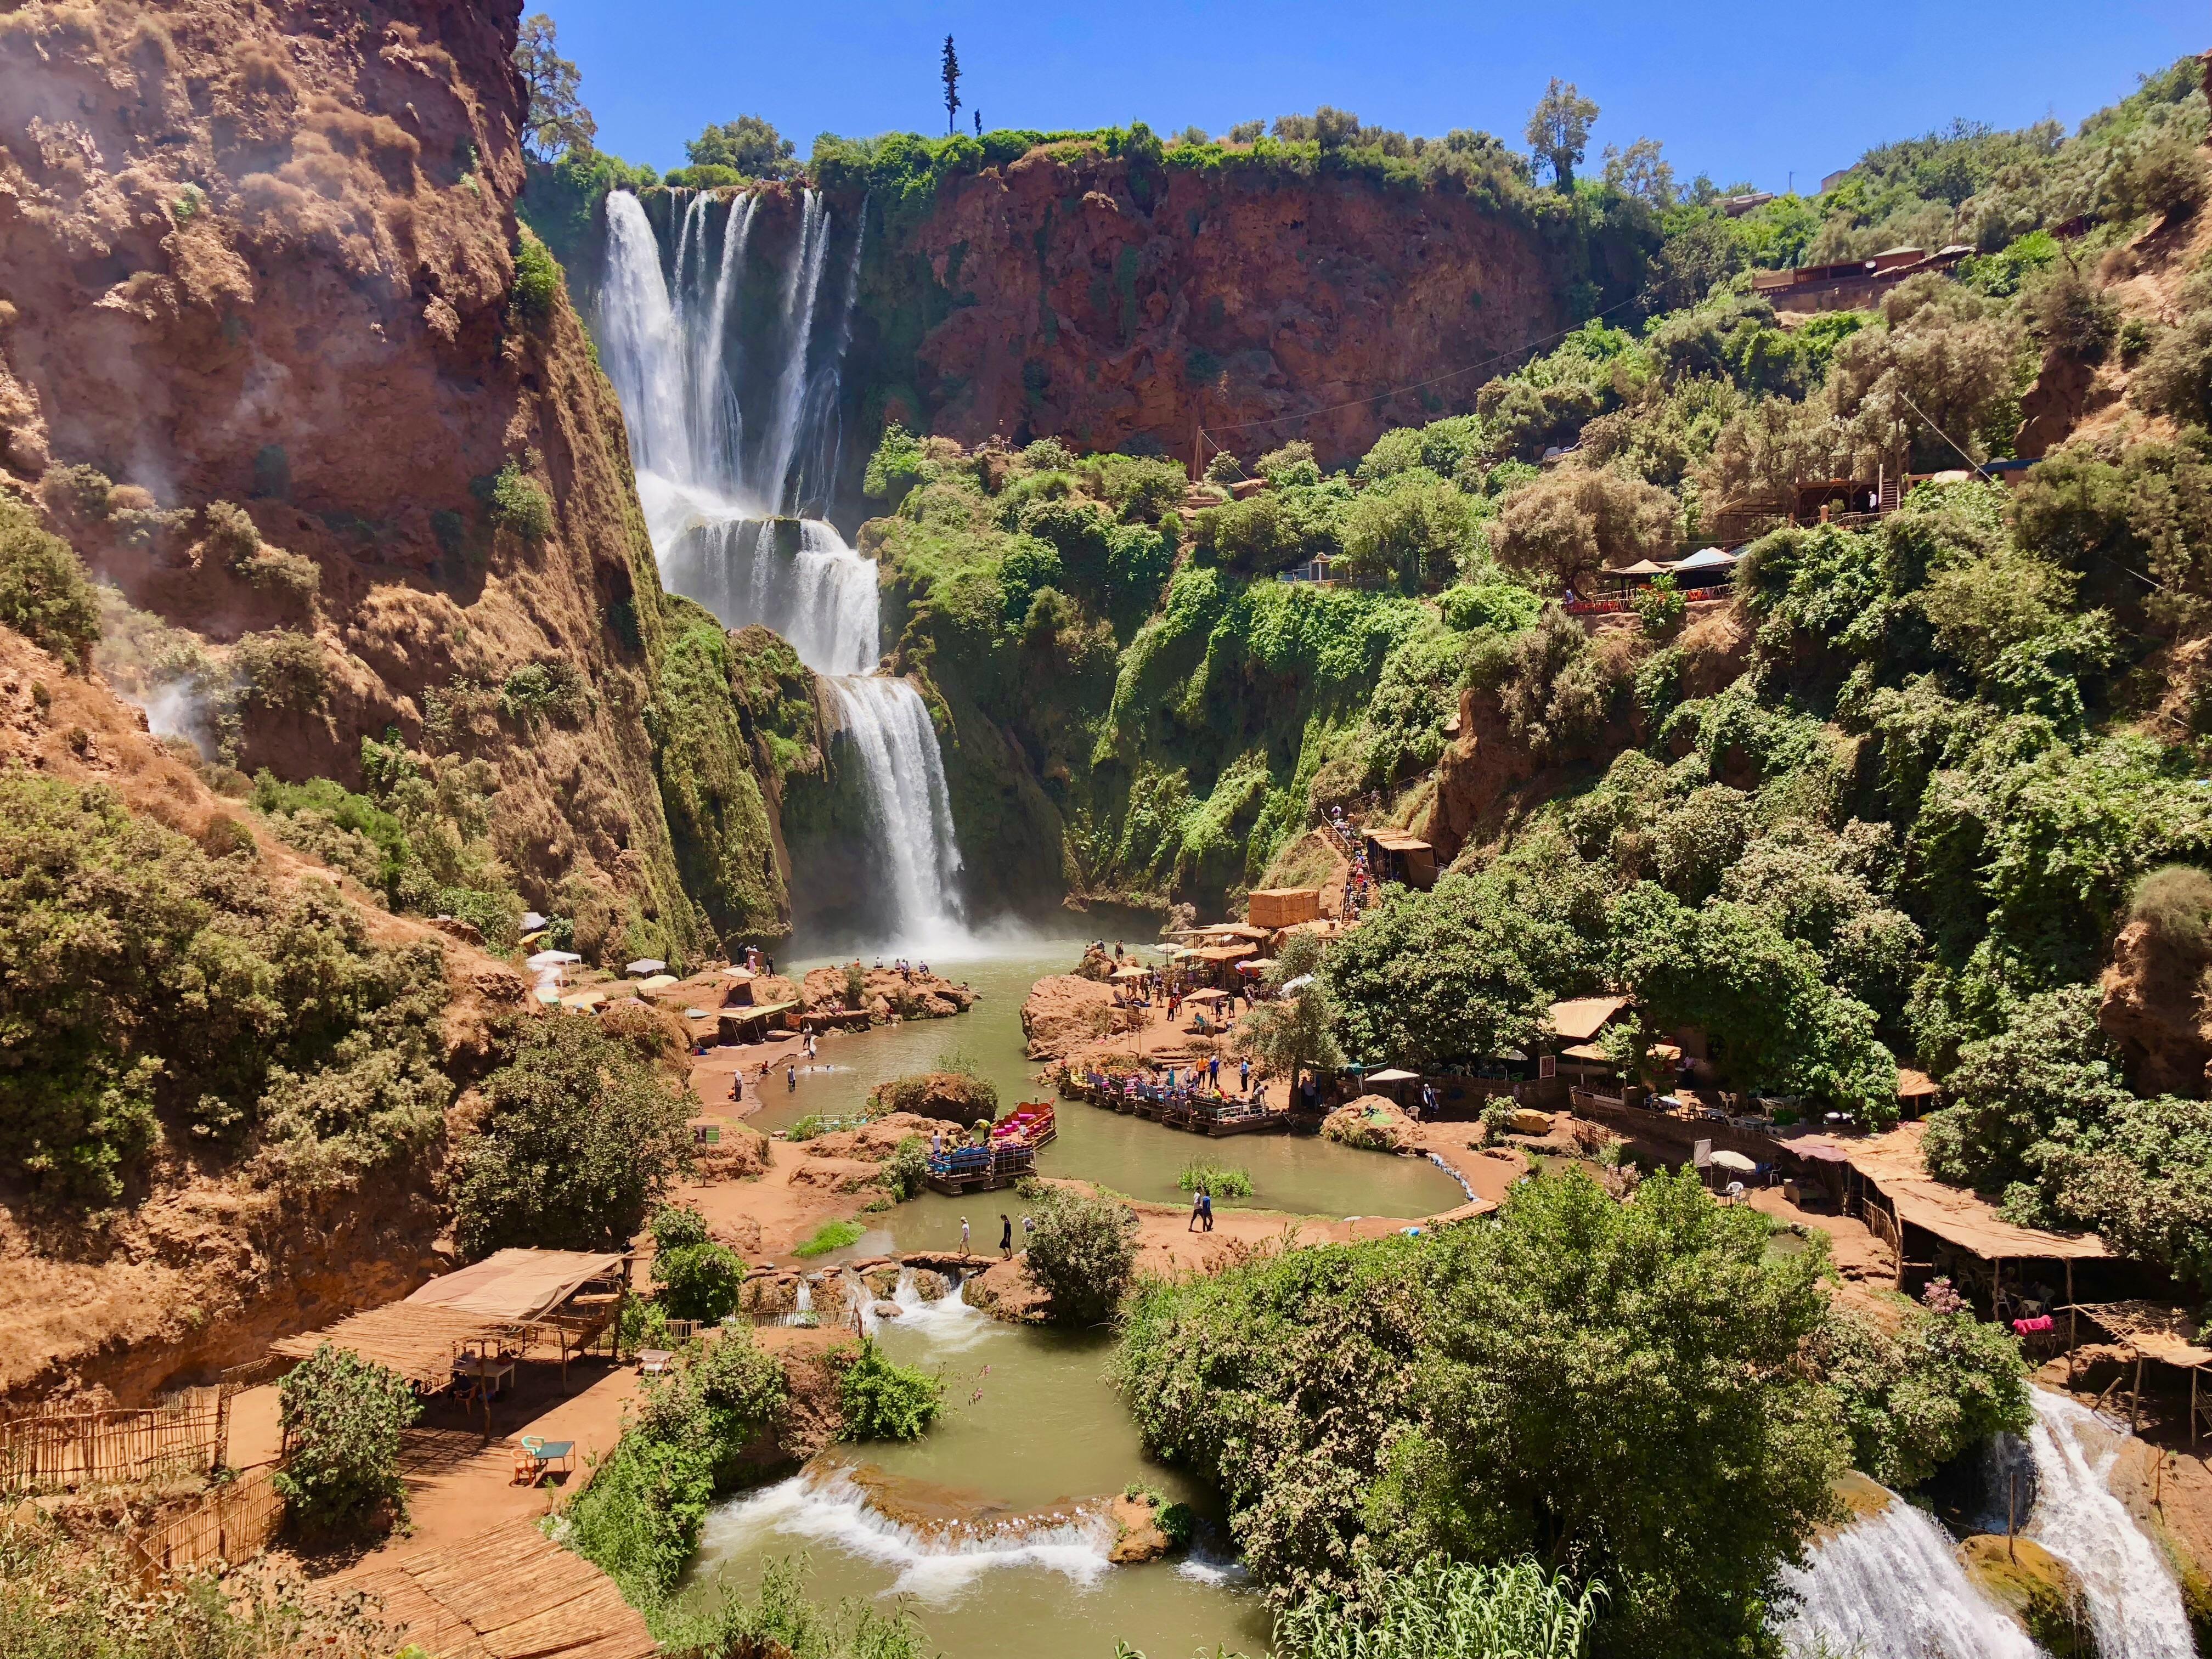 Morocco day trip from Marrakech to Ouzoud waterfalls to refresh in the cascades